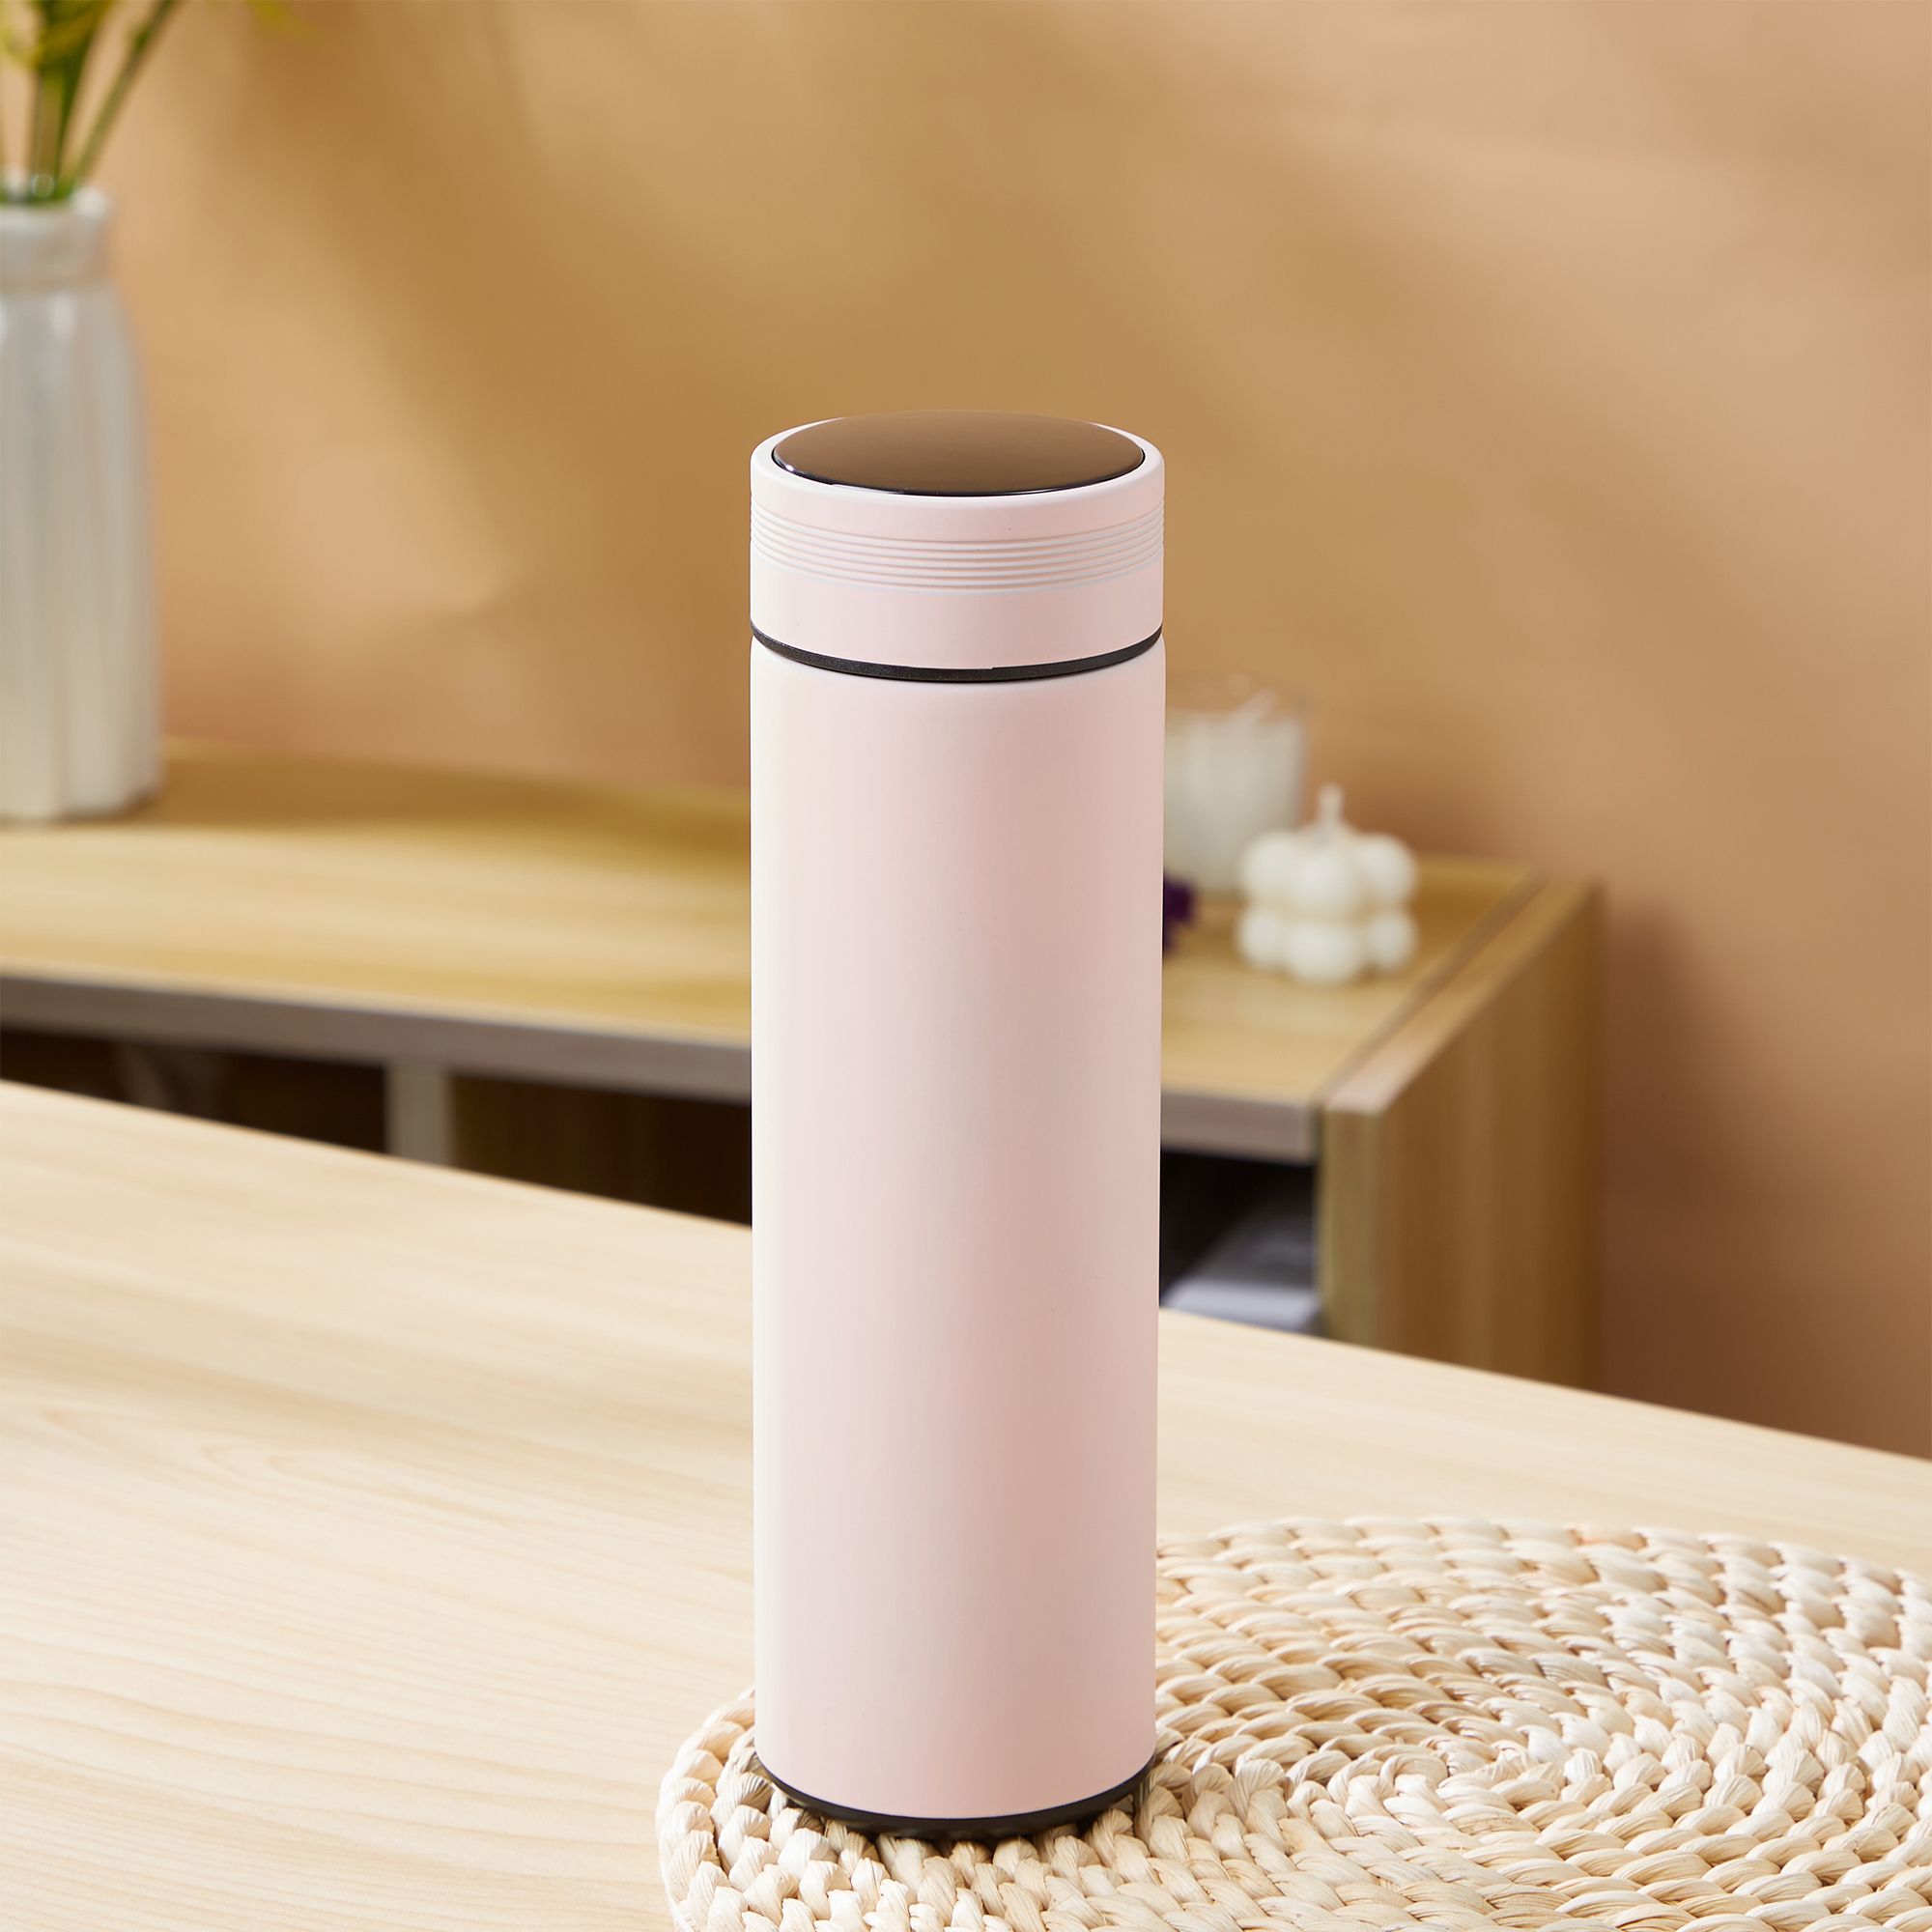 Morandi Color Stainless Steel Thermos Bottle With Intelligent Temperature Measurement Function